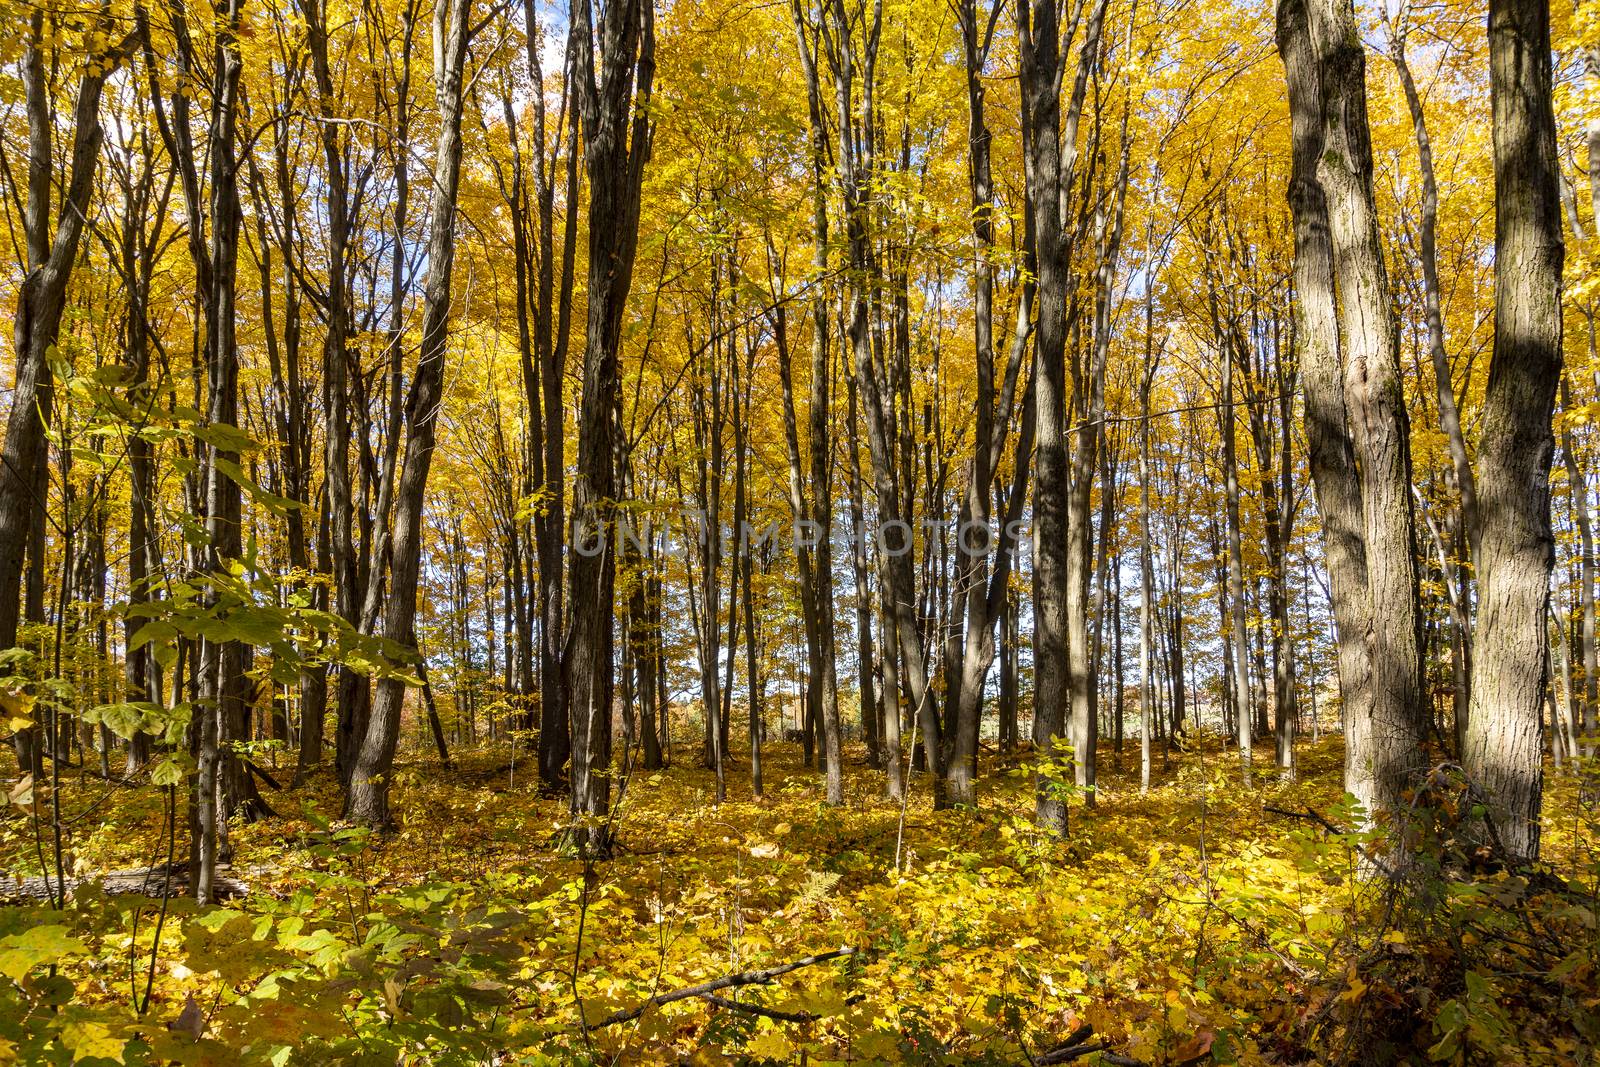 Beautiful foliage of gold, yellow and orange in a forest grove contrasts with the blue sky peeping through the foliage of the trees